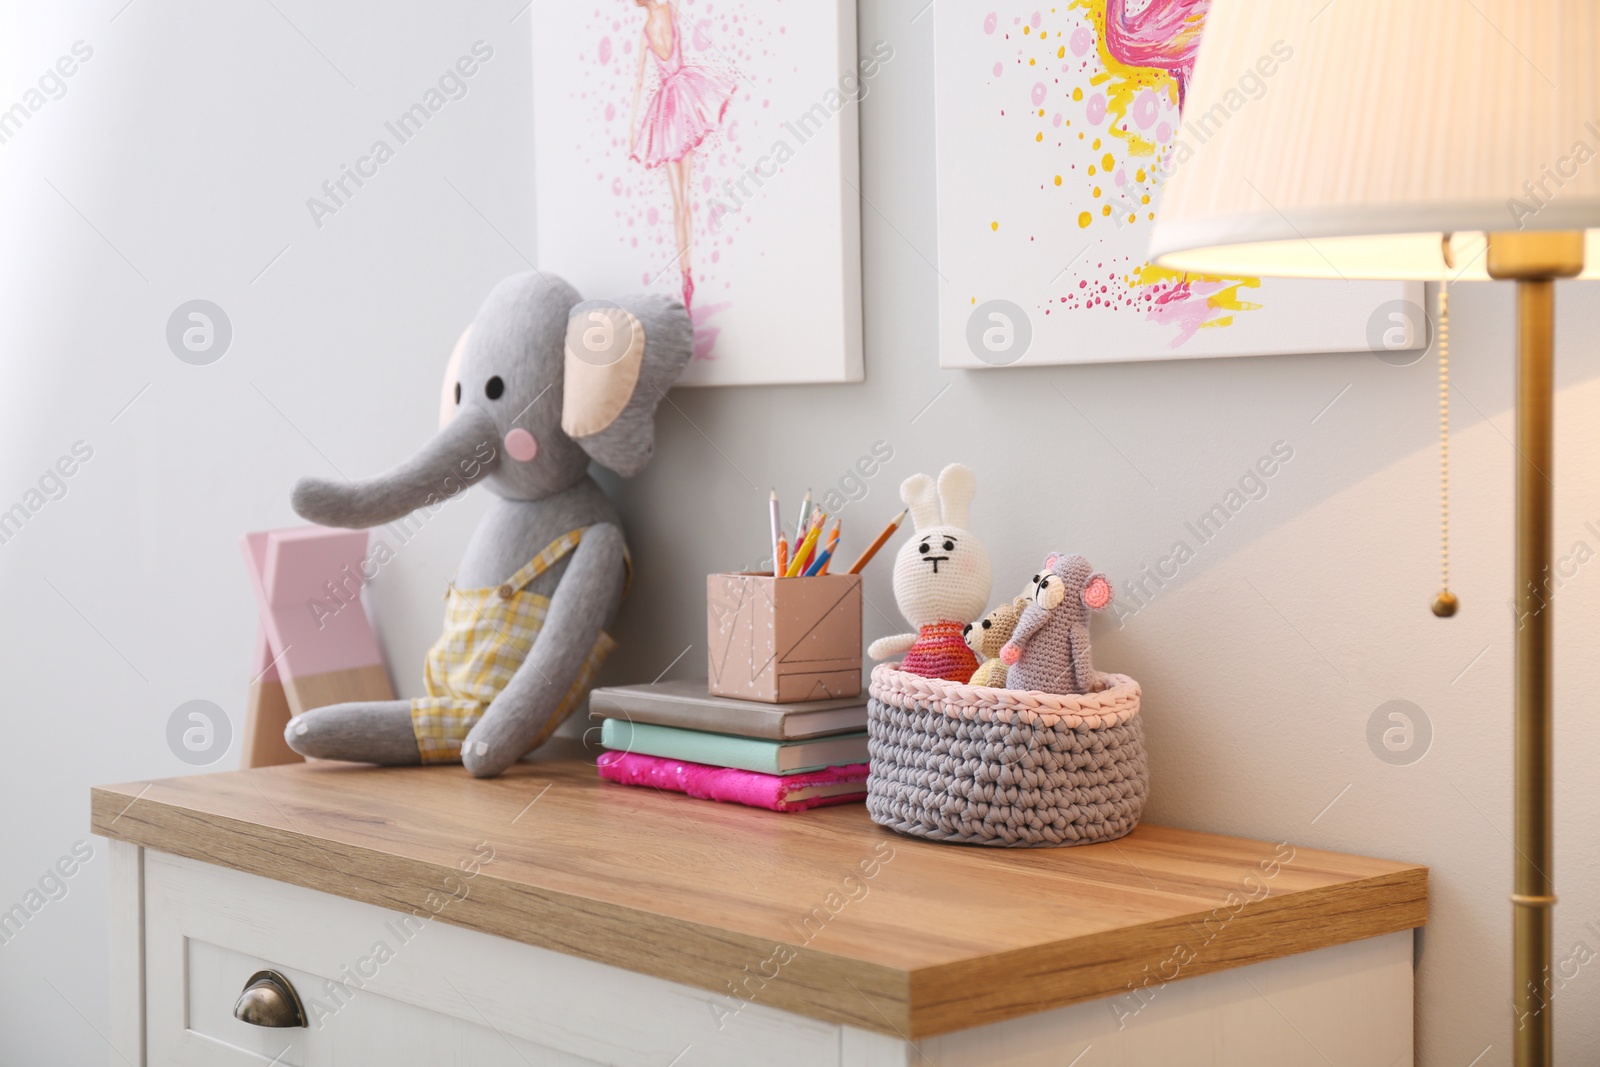 Photo of Chest of drawers and beautiful pictures in children's room. Interior design